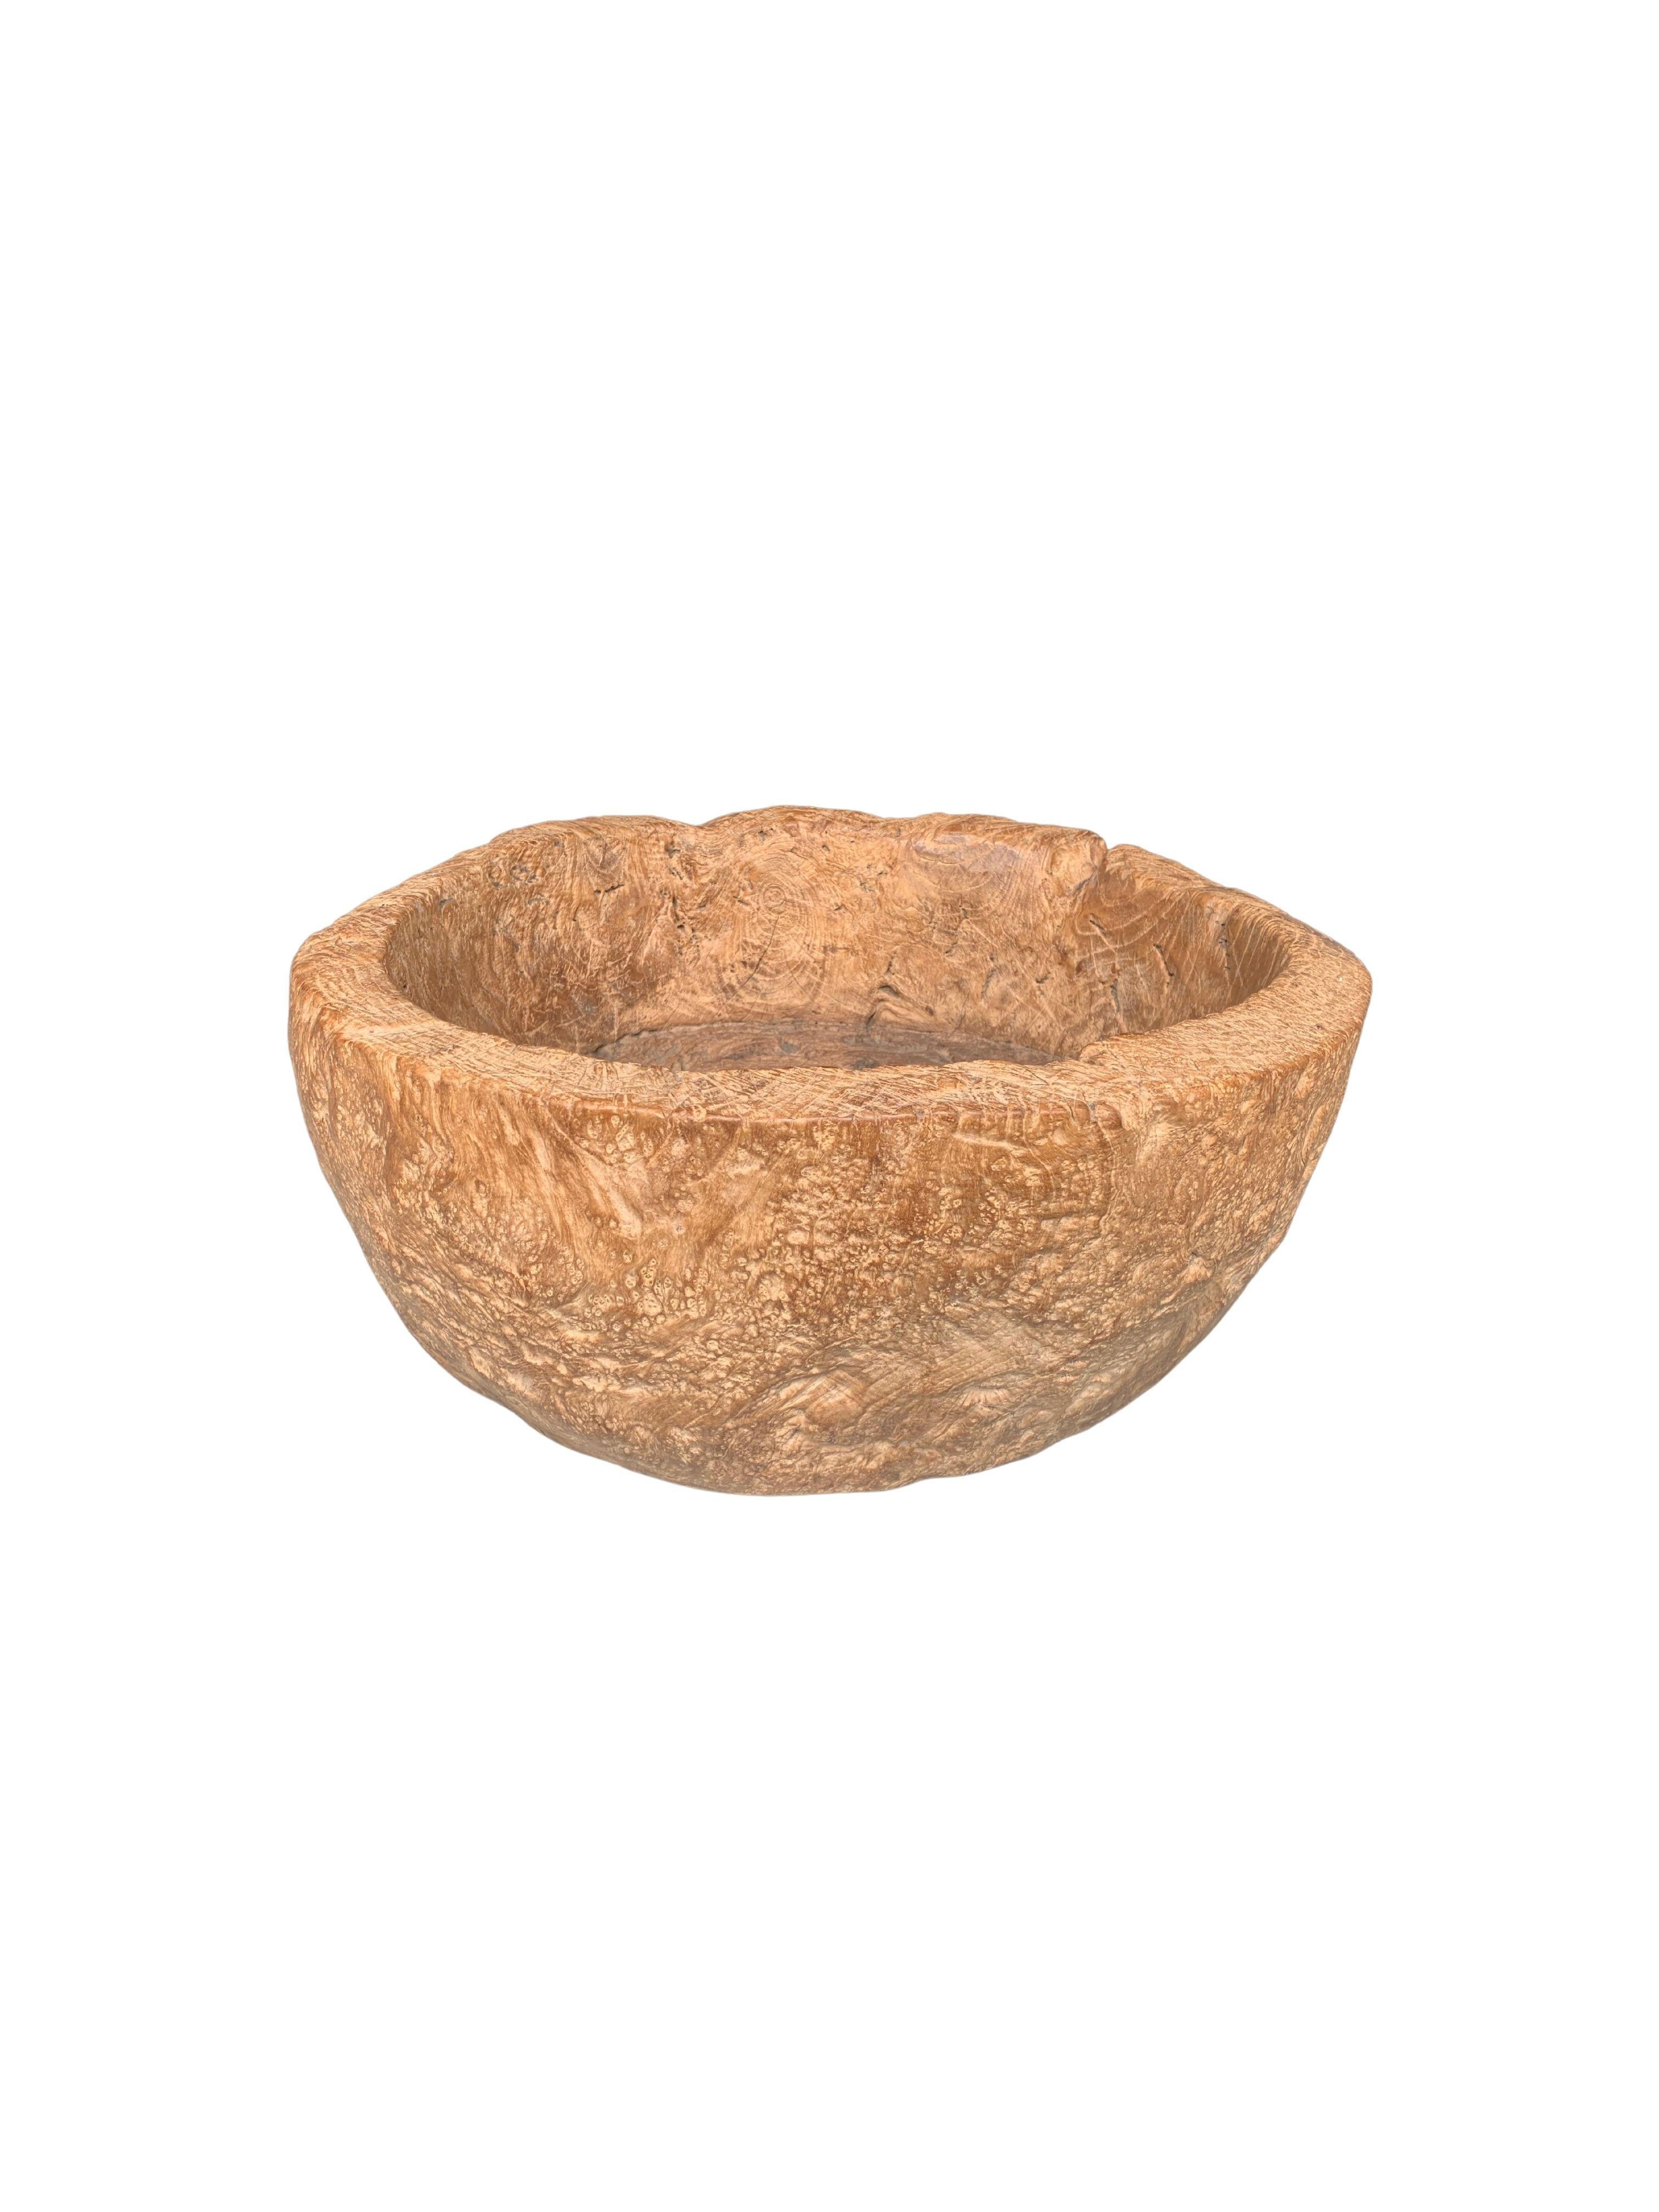 A solid teak wood bowl crafted on the island of Java from a slad of burl wood. The bowl features polished finish and is very solid with a think basin and walls. The bowl was cut from a much larger slab of wood and maintains a minimalist organic